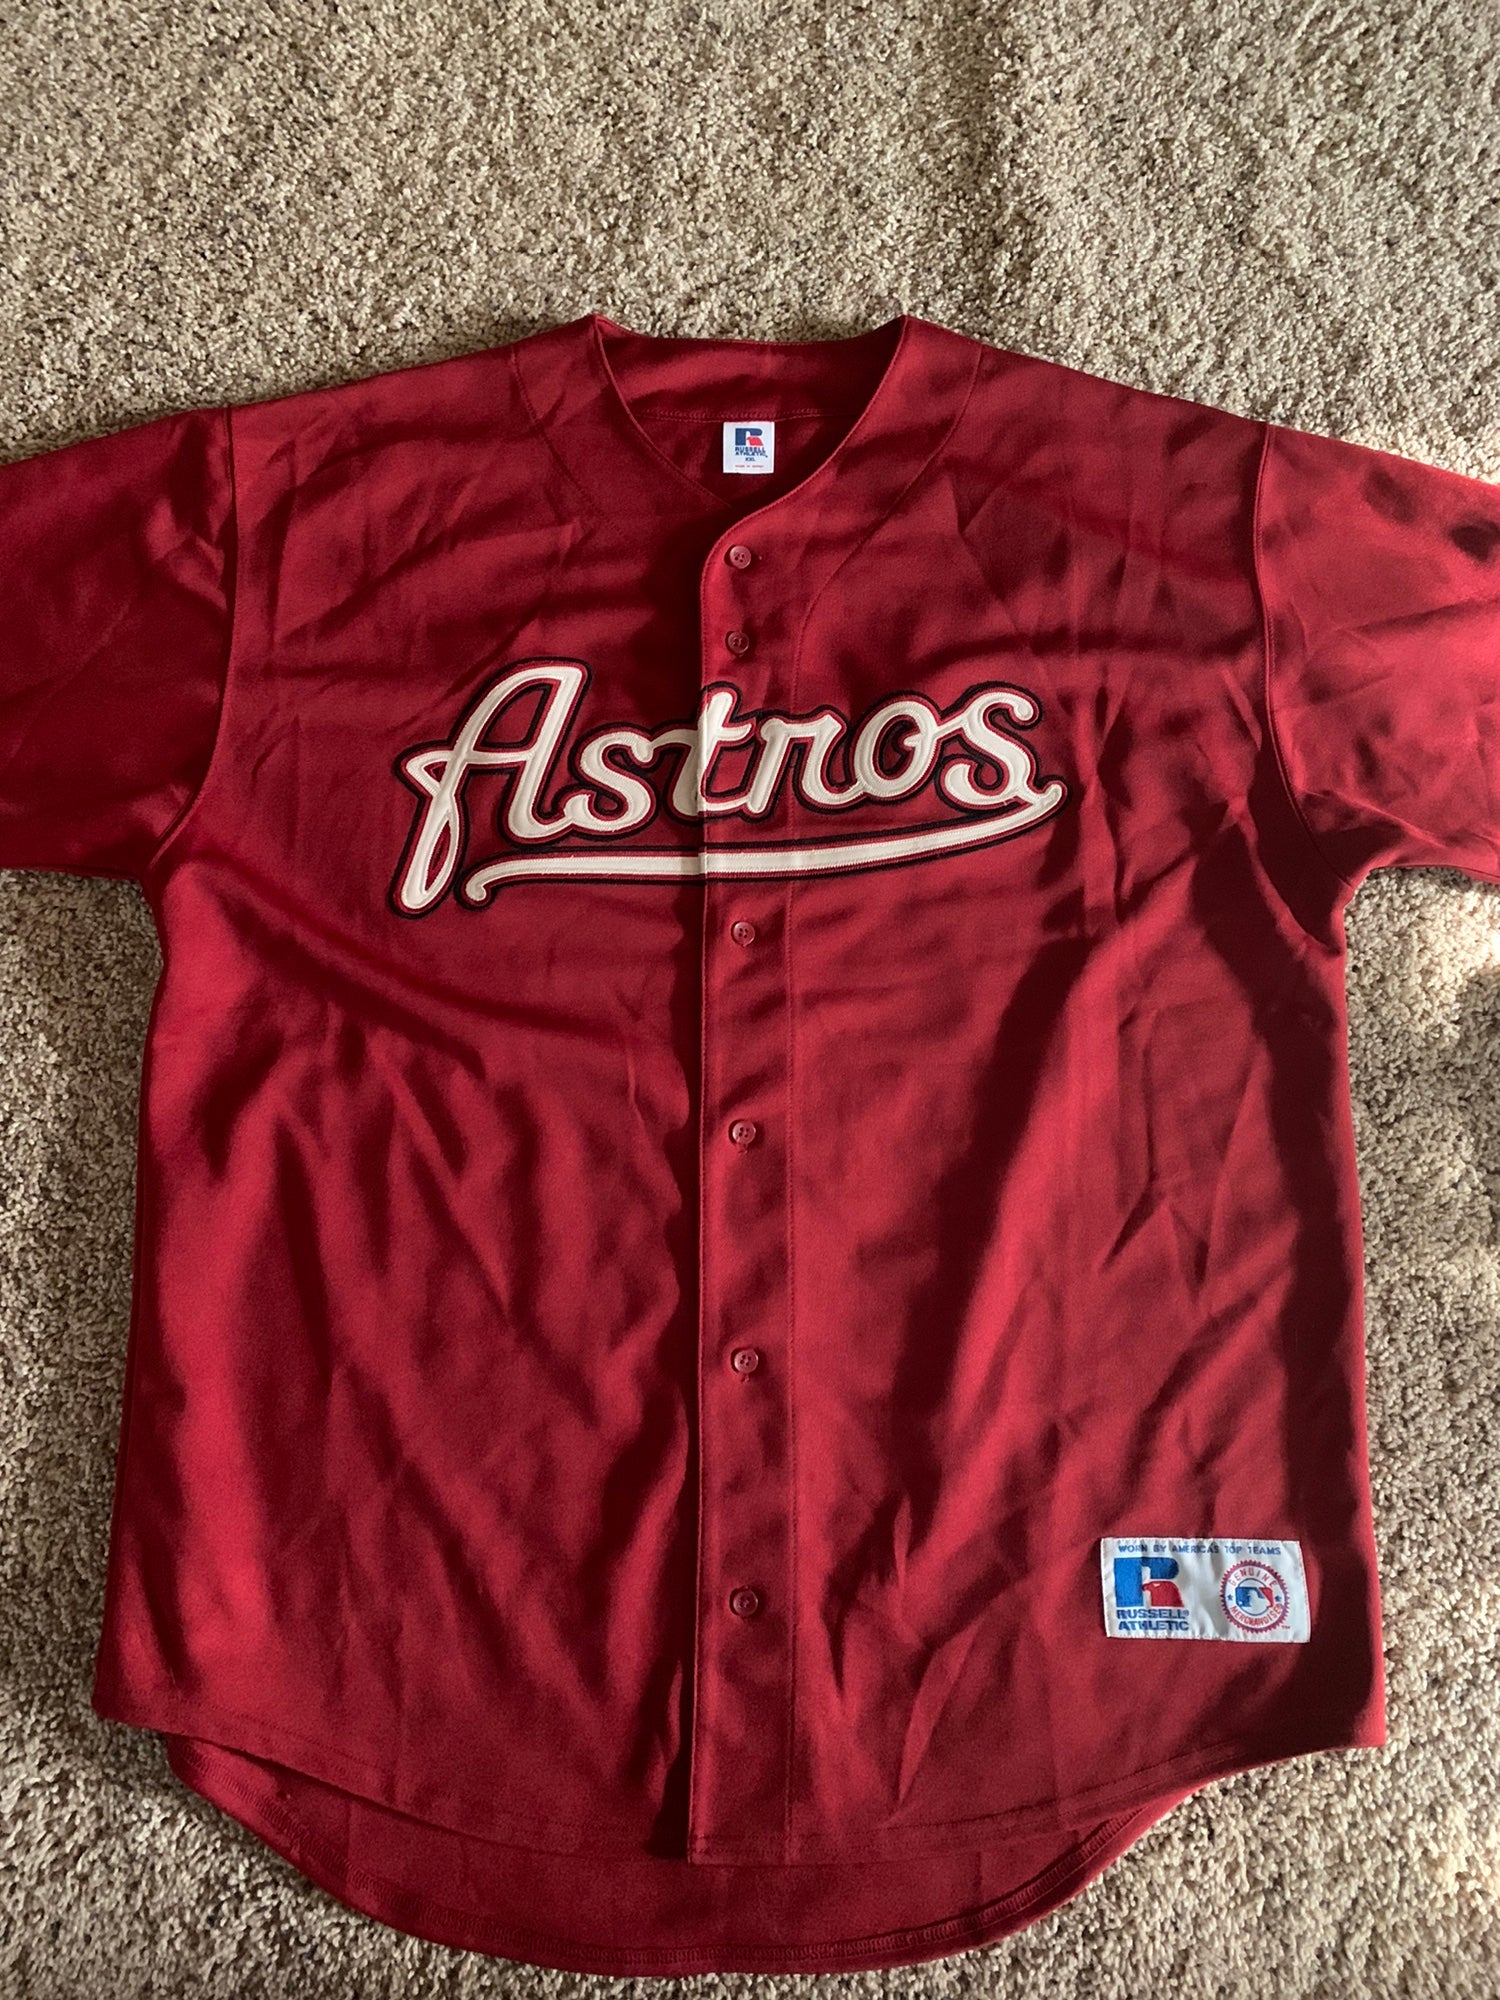 red houston astros jersey